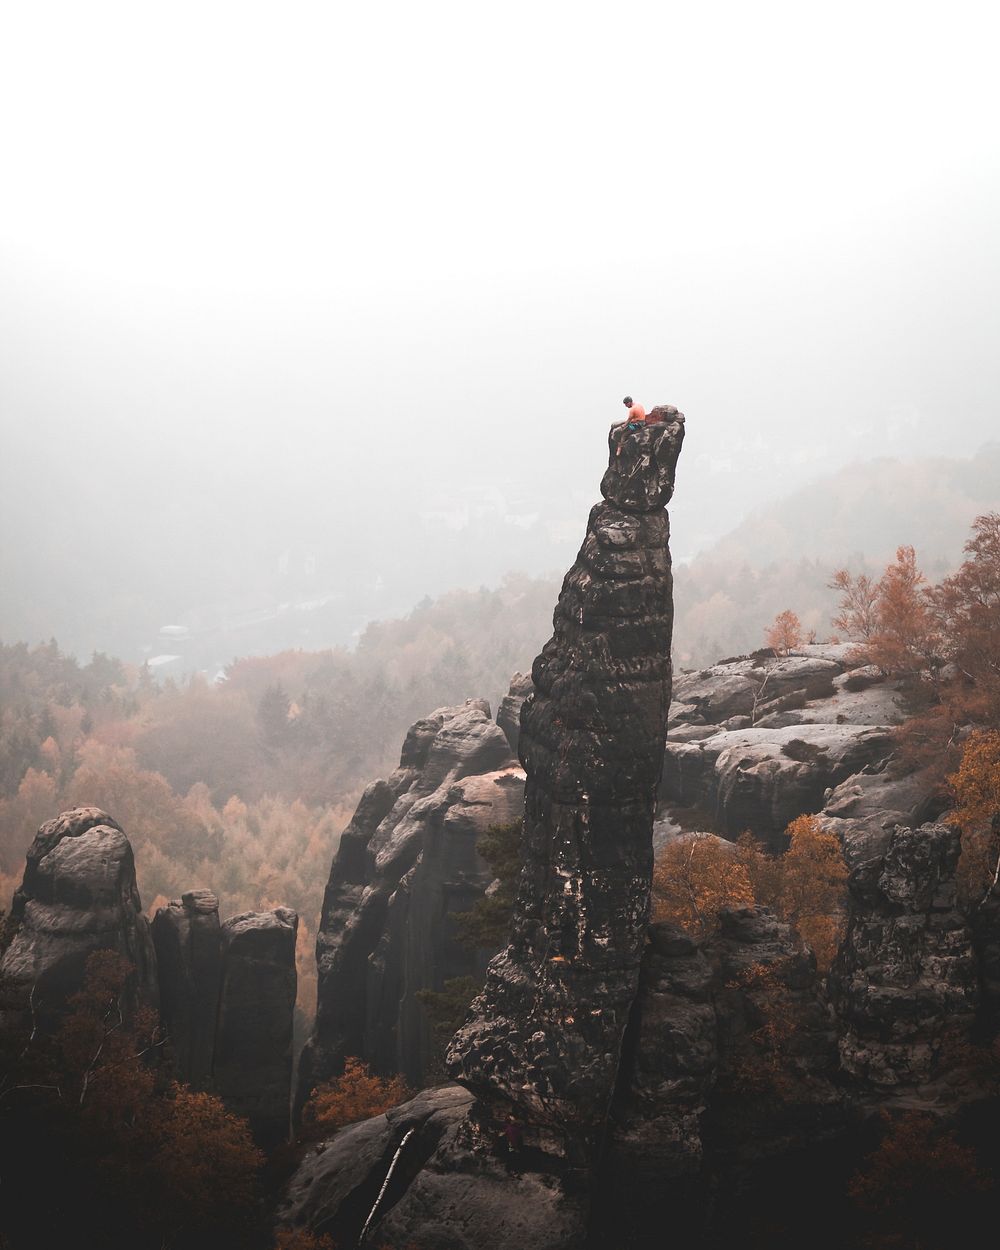 Climber on top of a needle rock at Elbe Sandstone Mountains in Czech Republic